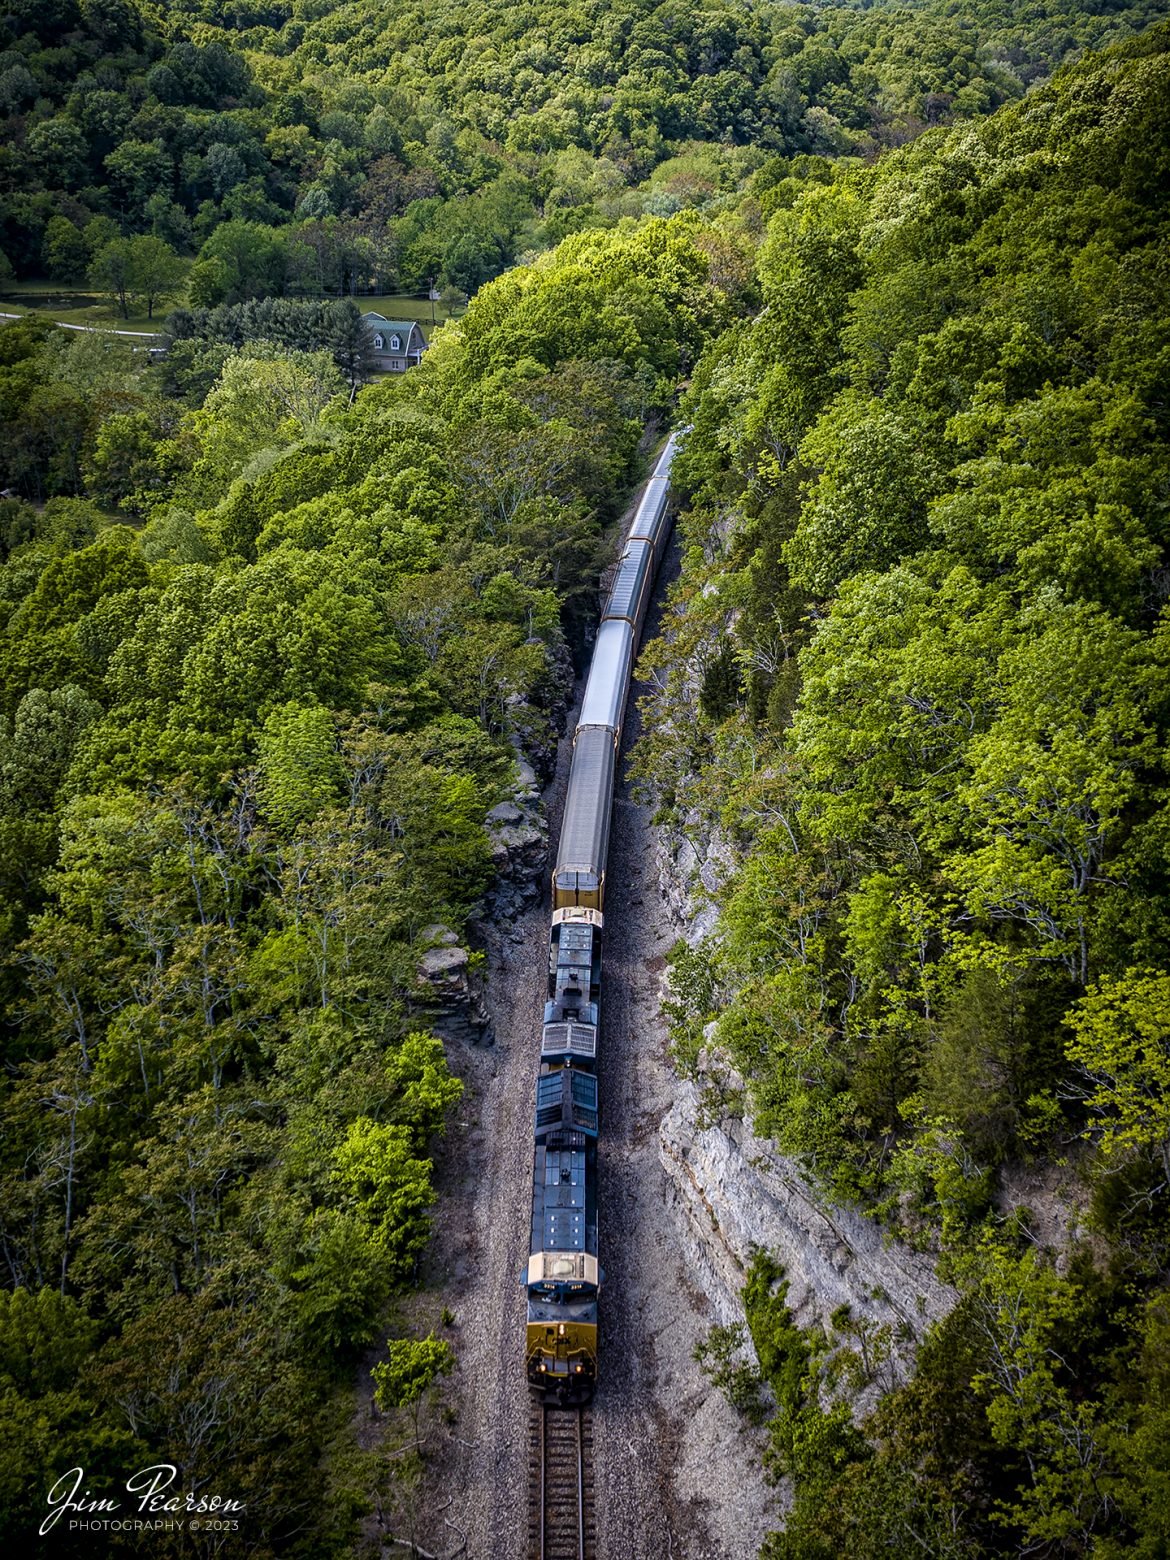 CSX 3314 leads I025 south after recently exiting Baker Tunnel at Ridgetop, Tennessee on May 6th, 2023, on the Henderson Subdivision. This train carries a string of autoracks filled with Teslas in addition to its normal train of intermodal containers as it makes its way to Jacksonville, Florida from Chicago, Illinois. 

Tech Info: DJI Mavic 3 Classic Drone, RAW, 24mm, f/2.8, 1/500, ISO 100.

#trainphotography #railroadphotography #trains #railways #dronephotography #trainphotographer #railroadphotographer #jimpearsonphotography #BNSFtrains #mavic3classic #drones #trainsfromtheair #trainsfromadrone #CSXT #TennesseeHills #CSXInternmadal #tennesseetrains